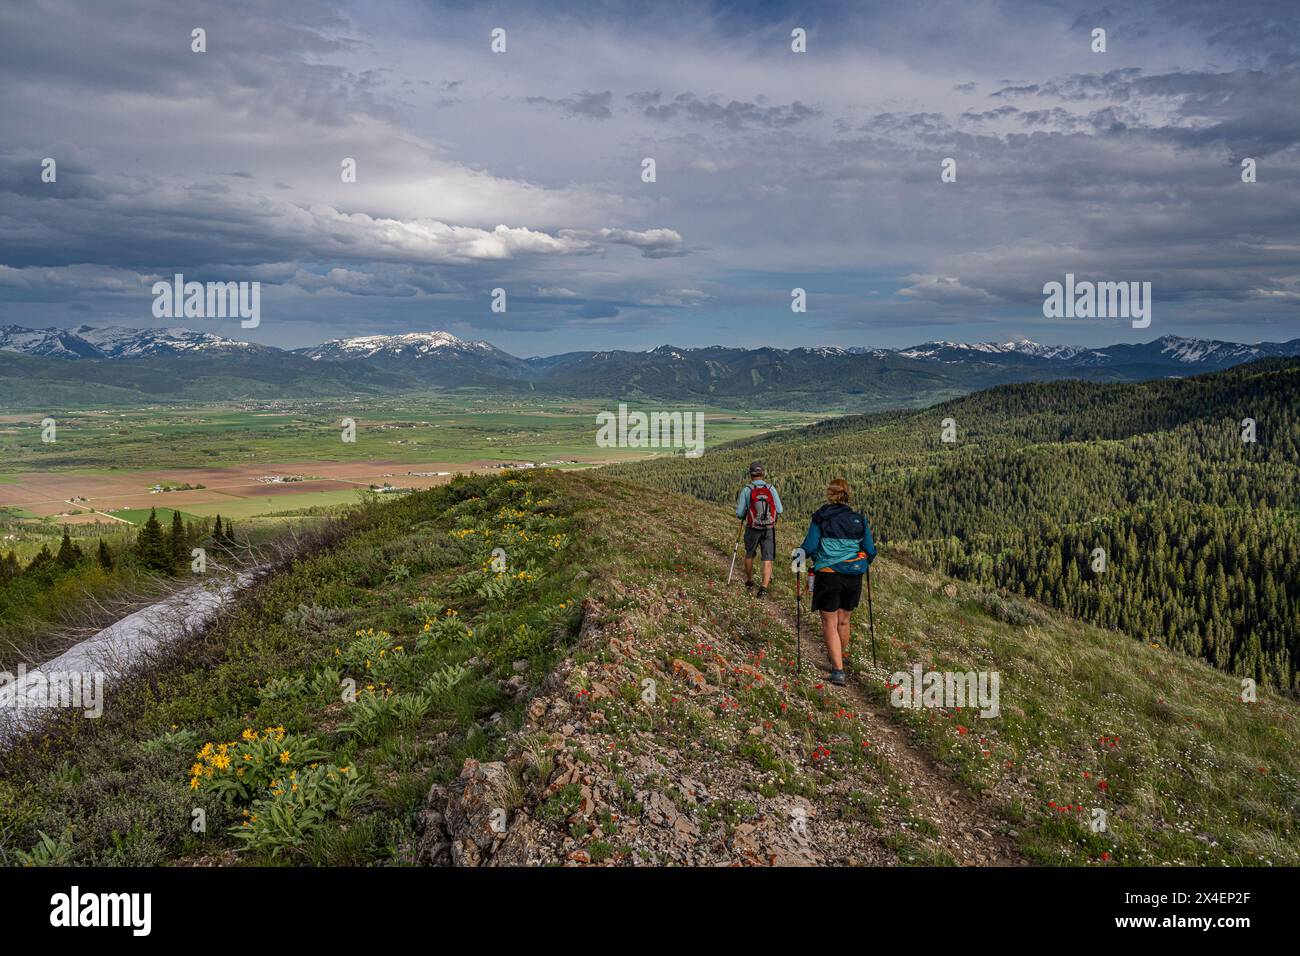 USA, Idaho. Couple hiking on trail in Big Hole Mountains with view of Teton Mountains and Valley. Stock Photo